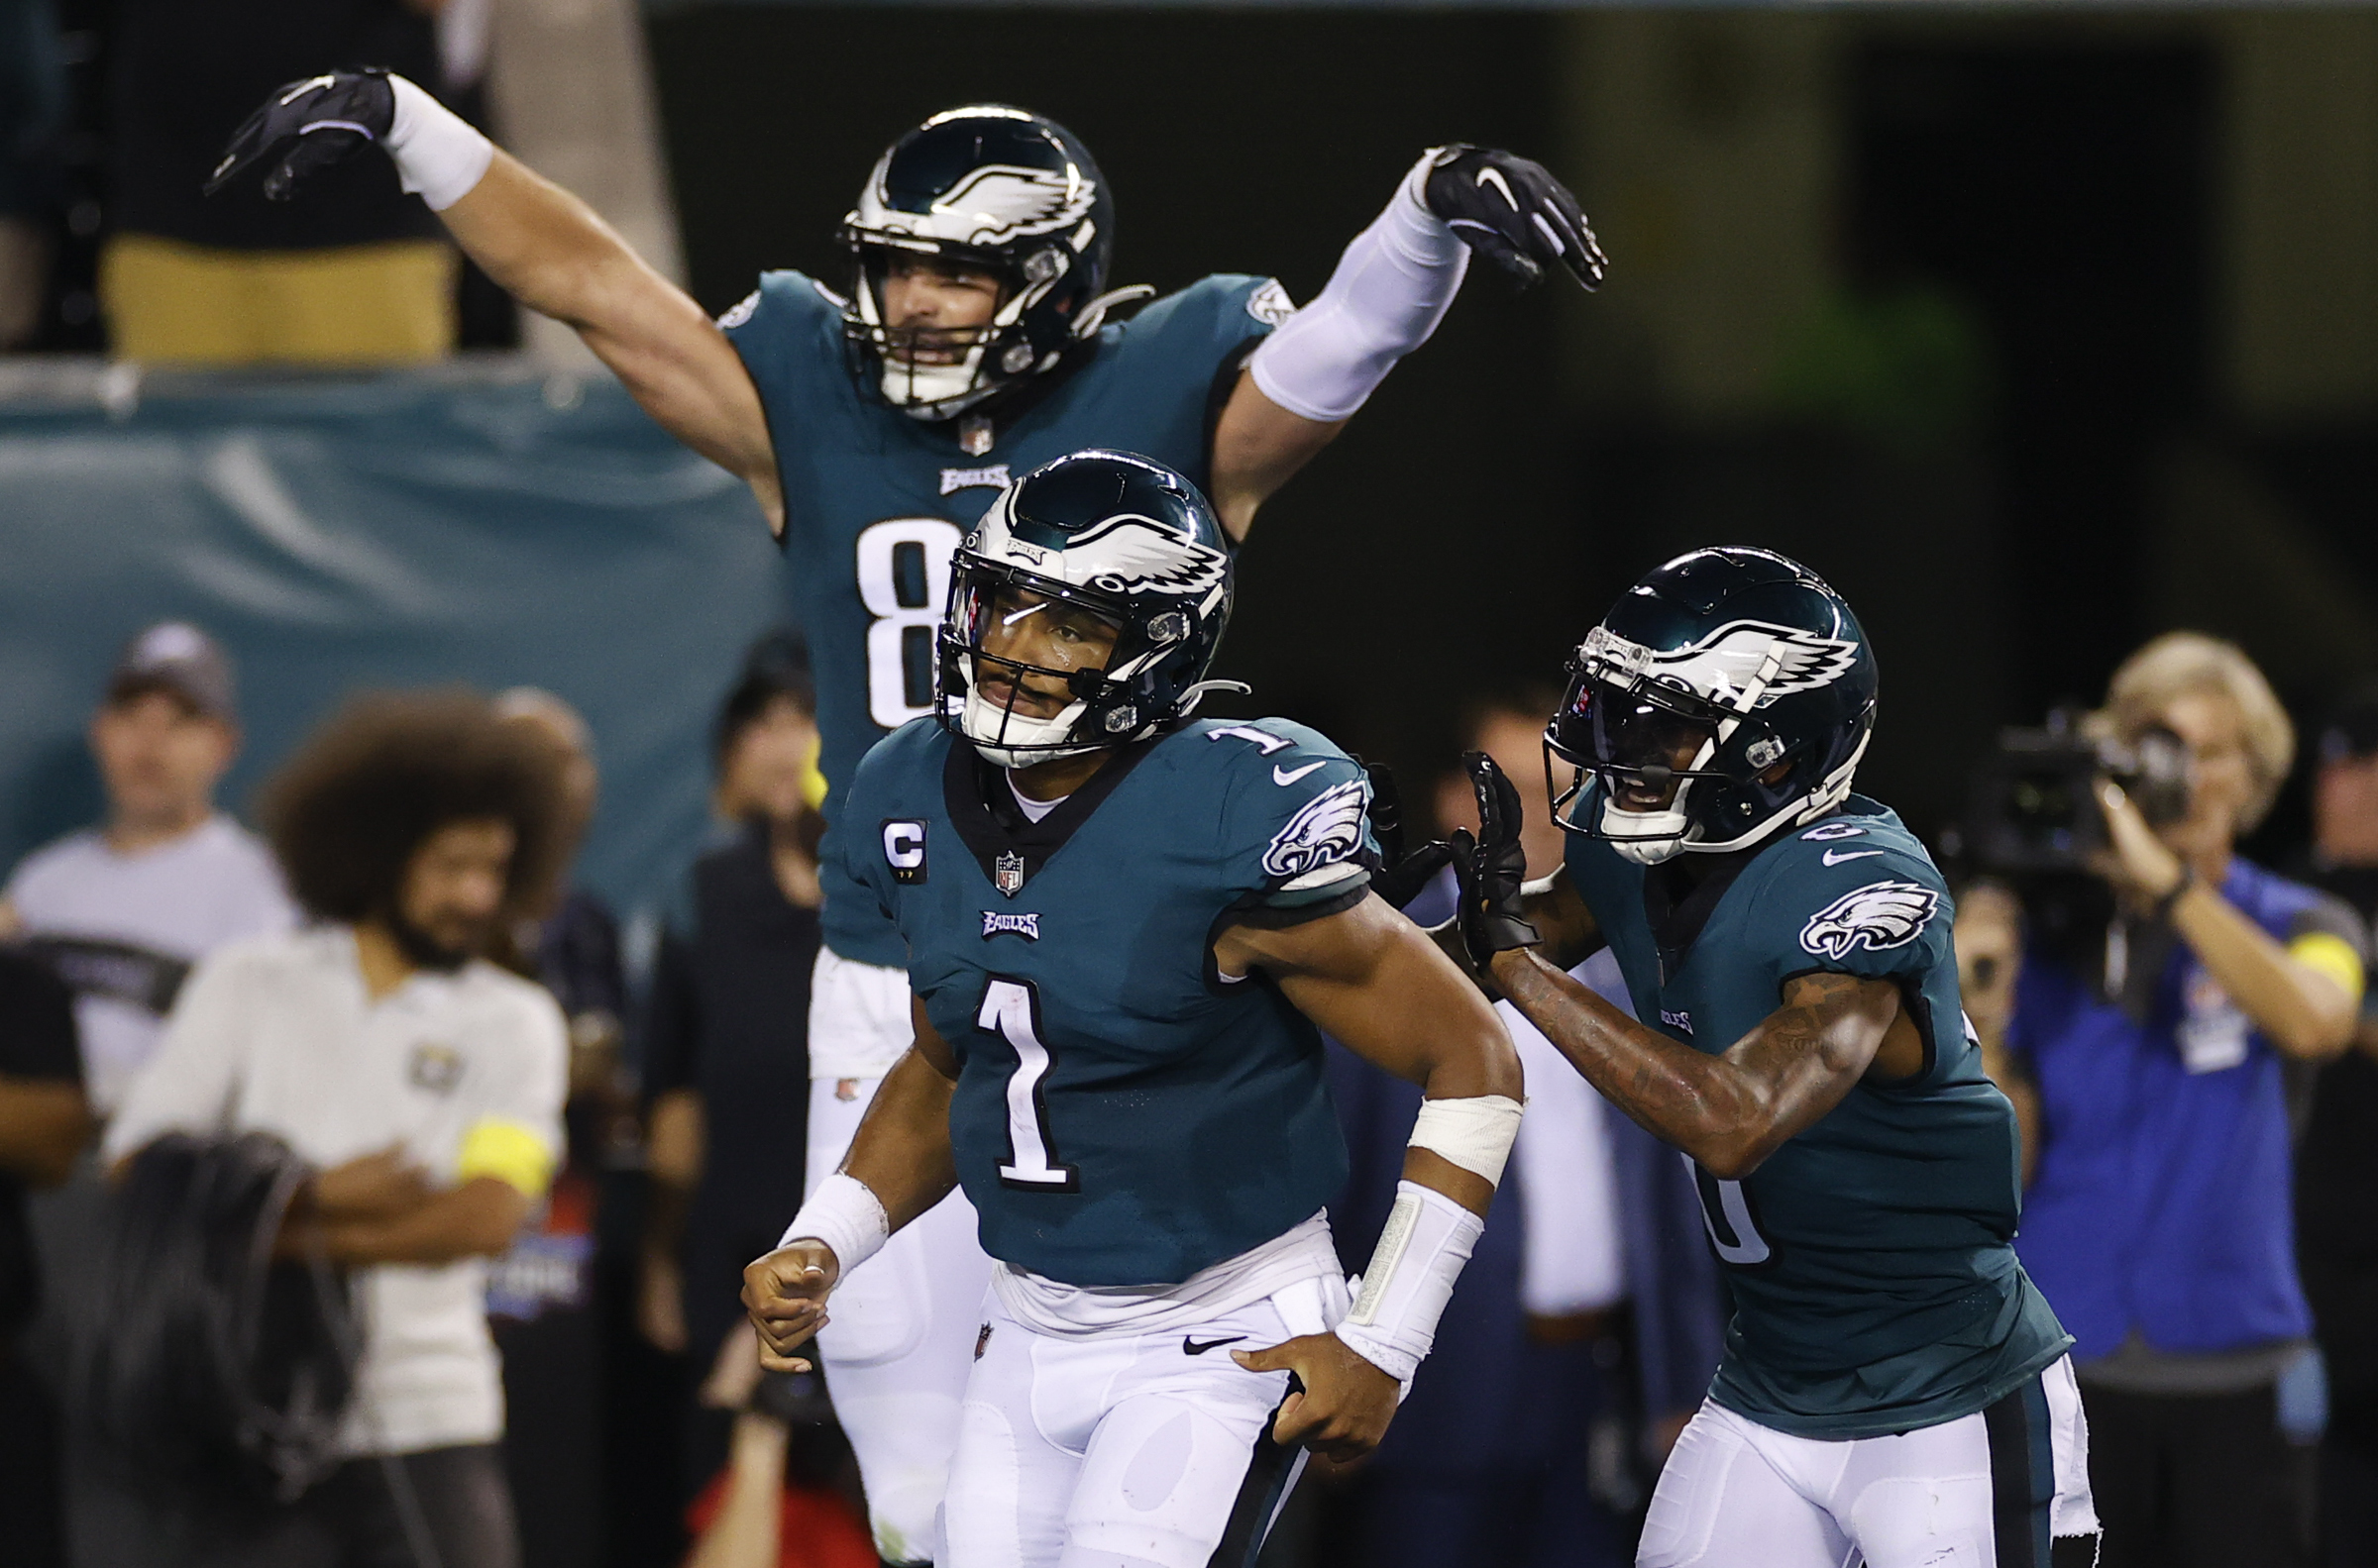 Eagles, NFL's Last Unbeaten Team, Fall to Commanders - The New York Times